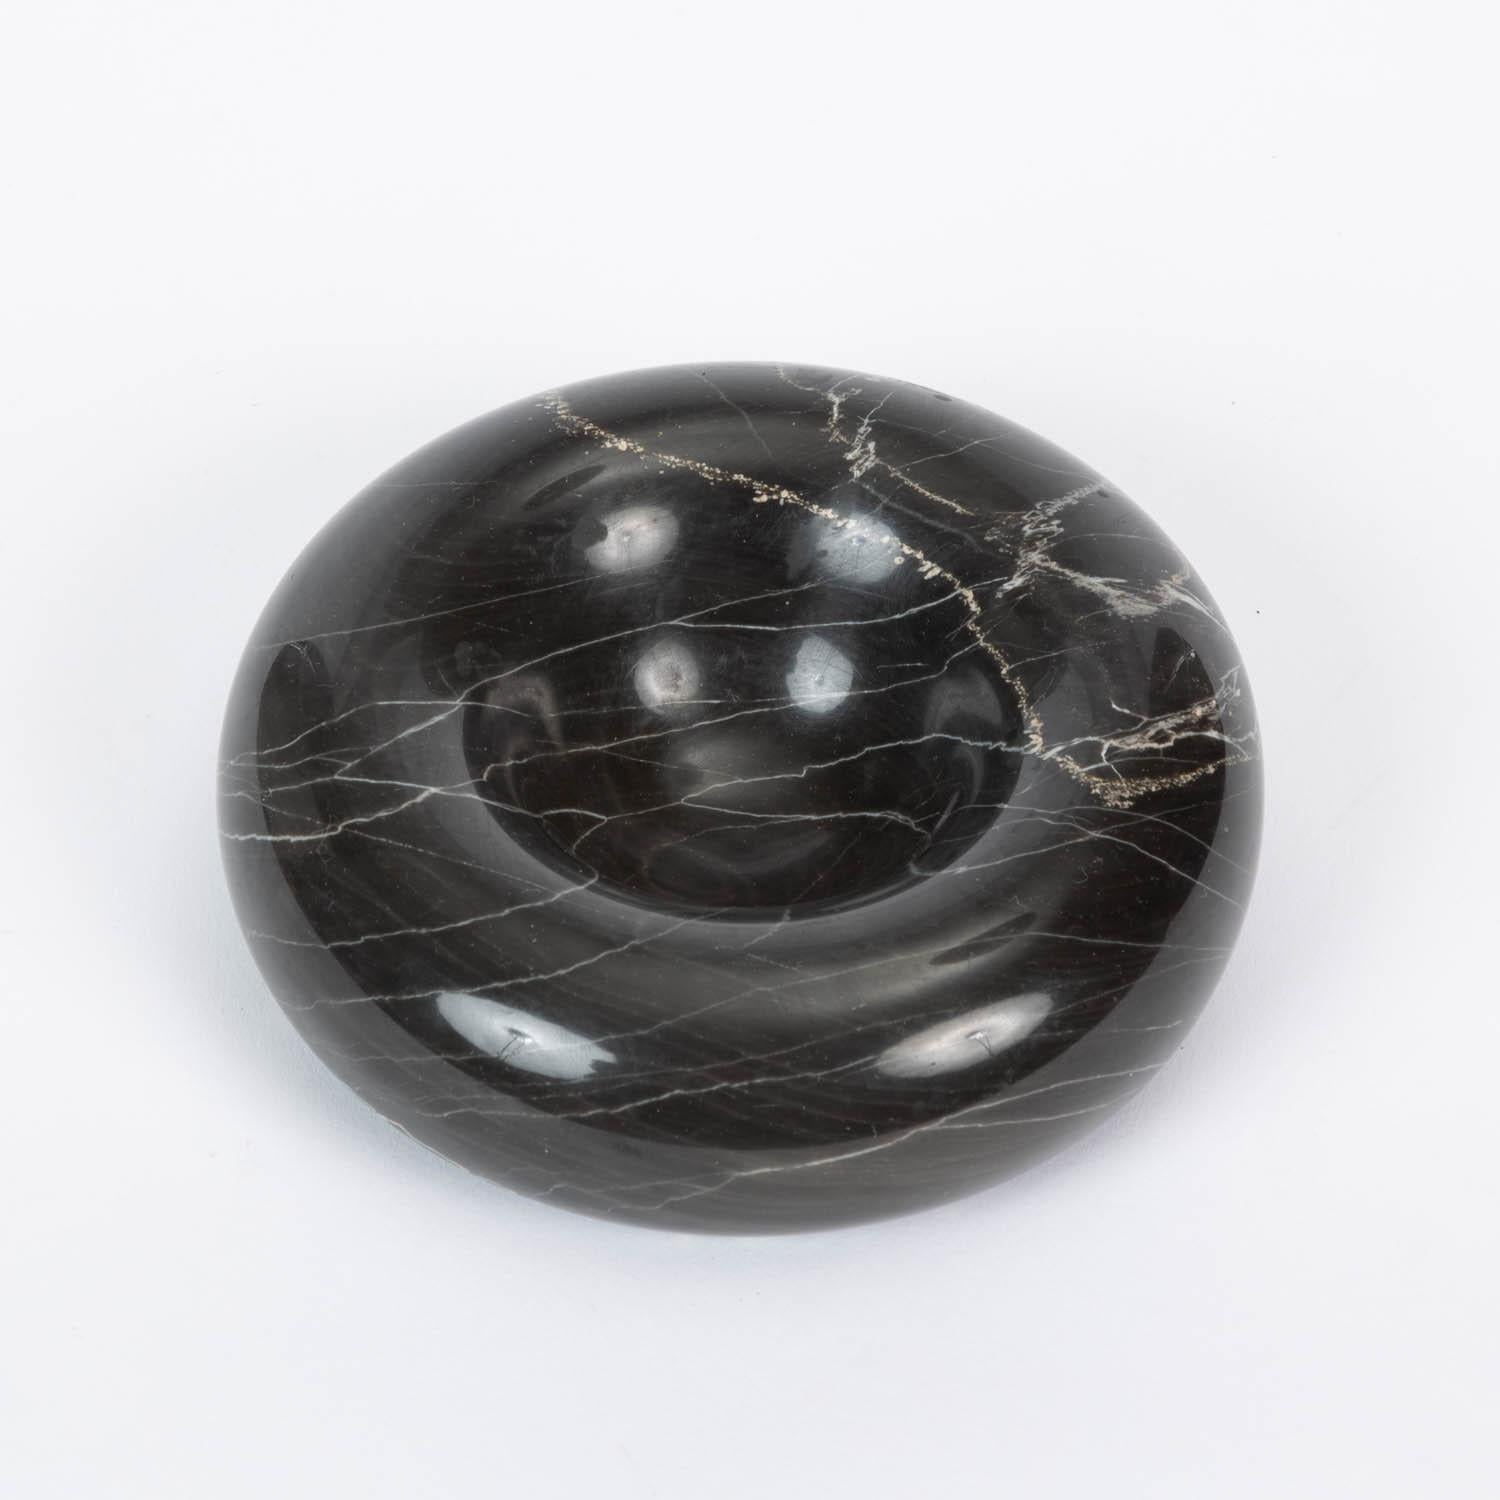 Italian marble art bowl by Sergio Asti for Up & Up, Italy circa 1970s. Polished Massa Carrara black marble with thin white veining. Marked “Made in Italy” and “Up & Up - massa Carrara”

Condition: Excellent vintage condition, no chips or cracks to